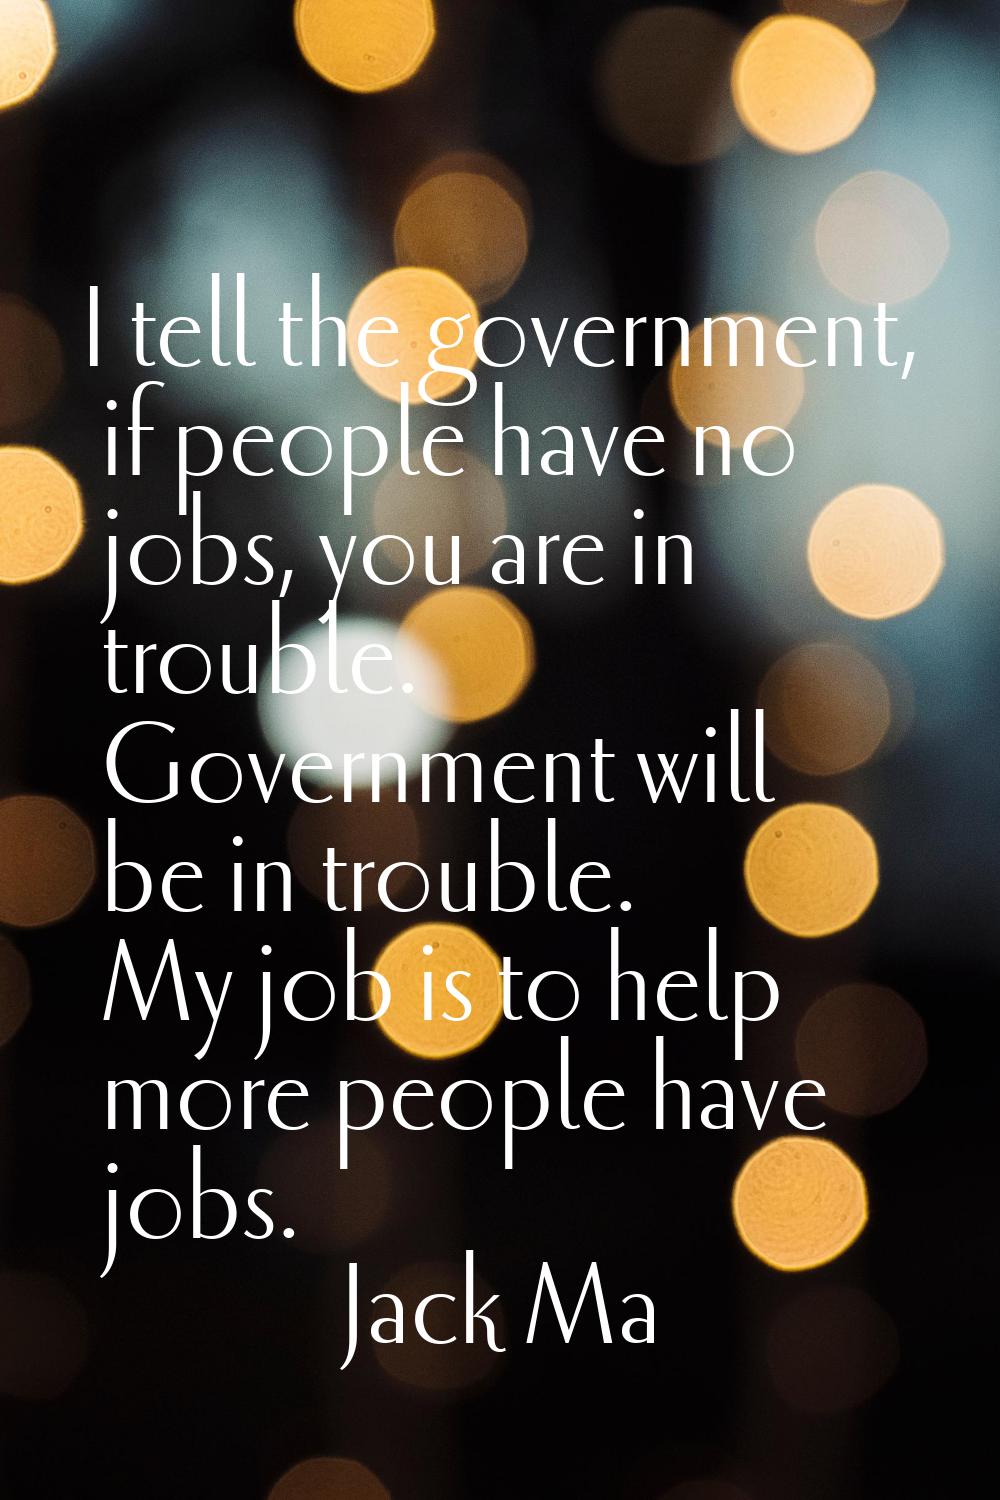 I tell the government, if people have no jobs, you are in trouble. Government will be in trouble. M